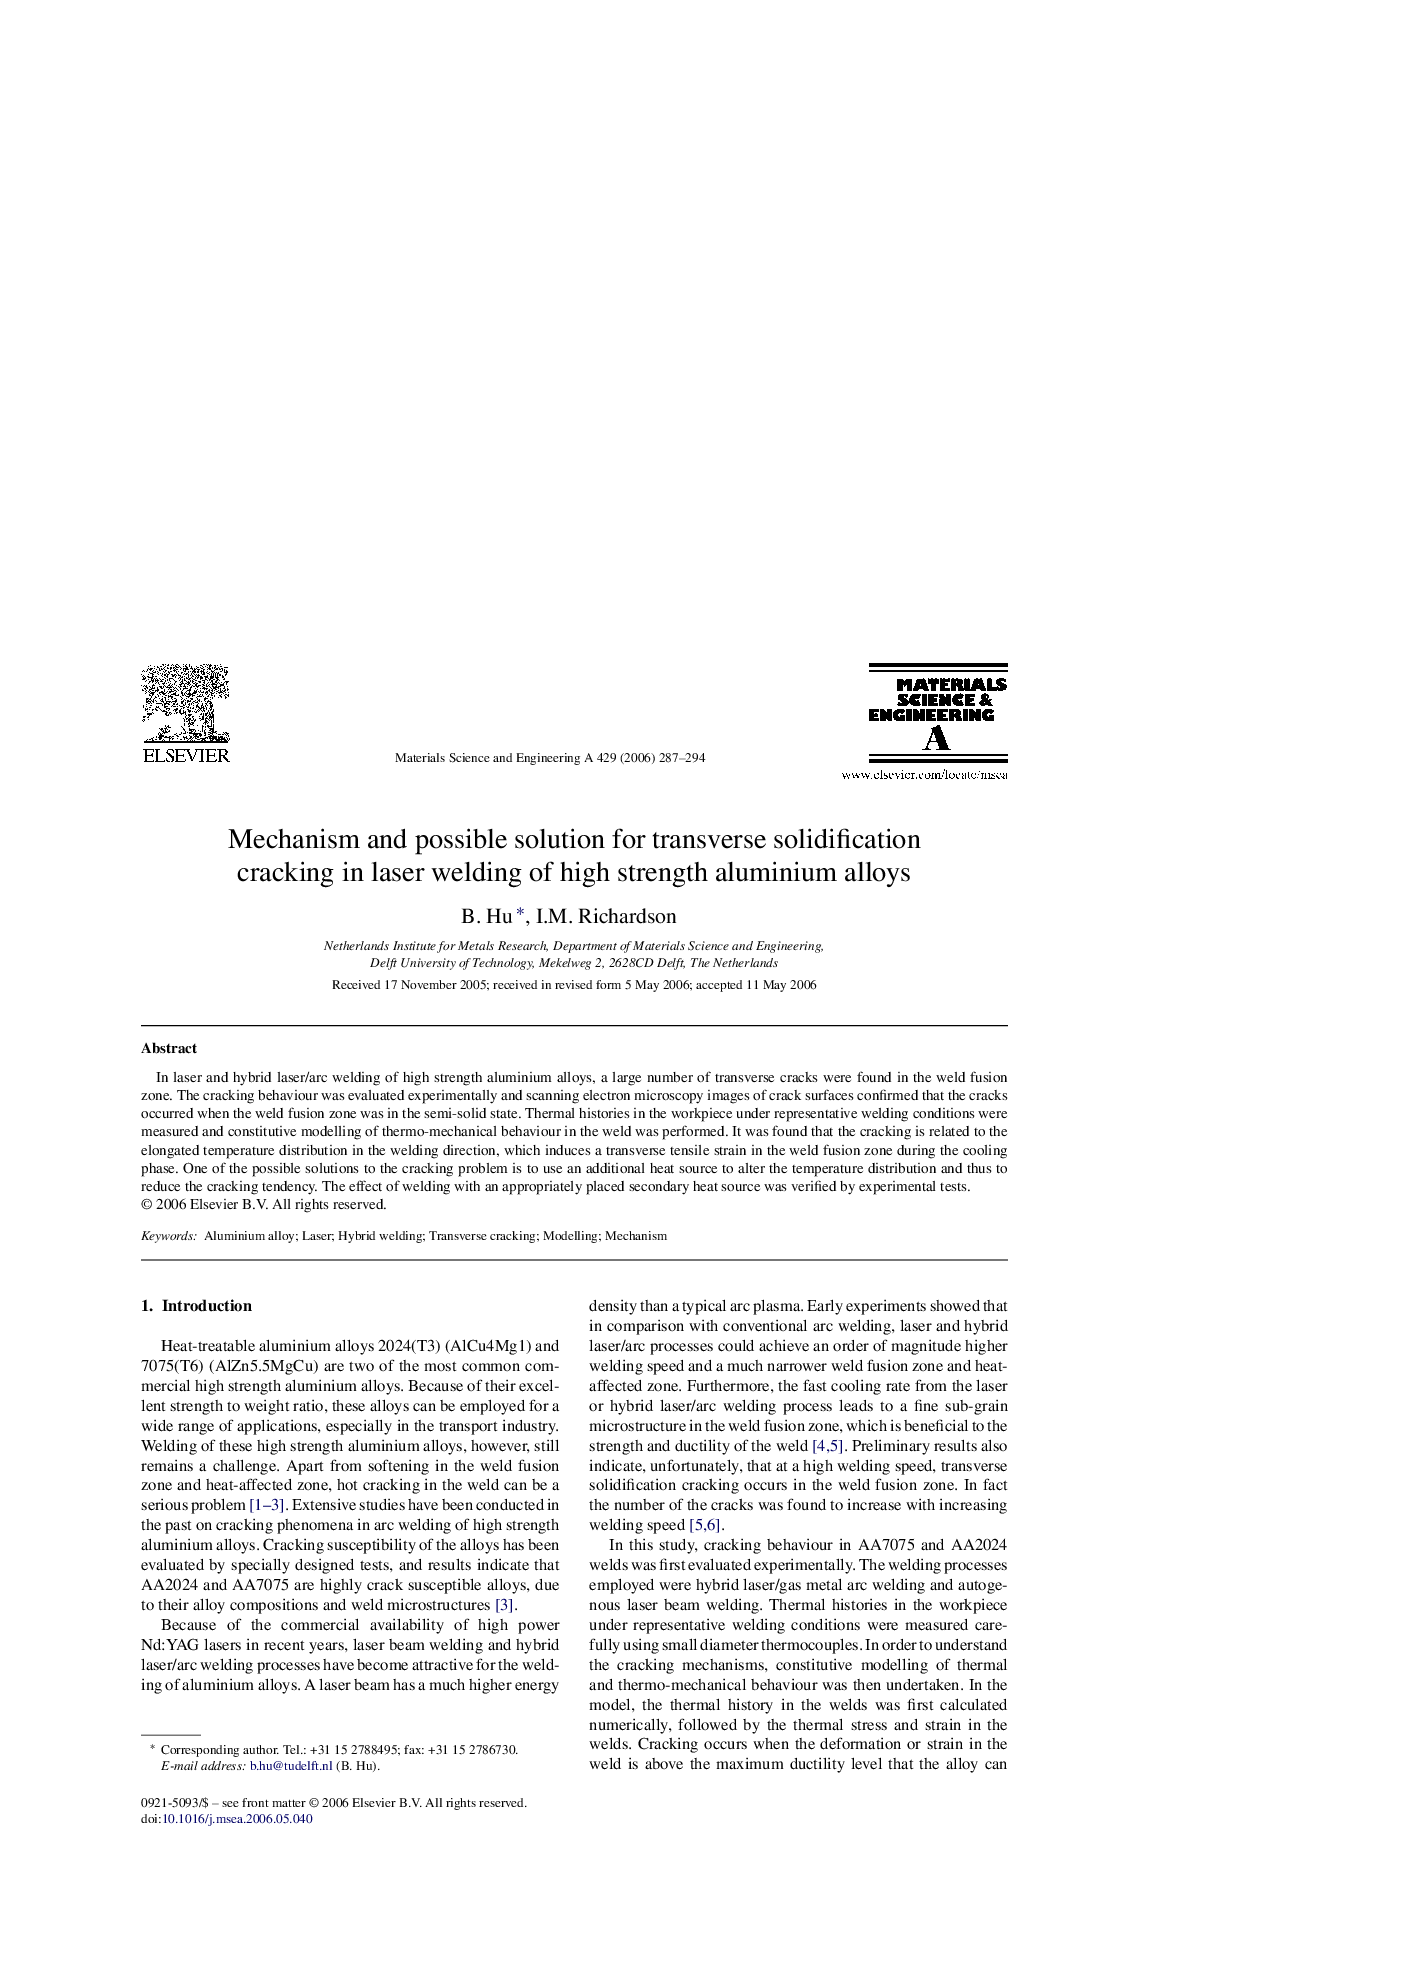 Mechanism and possible solution for transverse solidification cracking in laser welding of high strength aluminium alloys